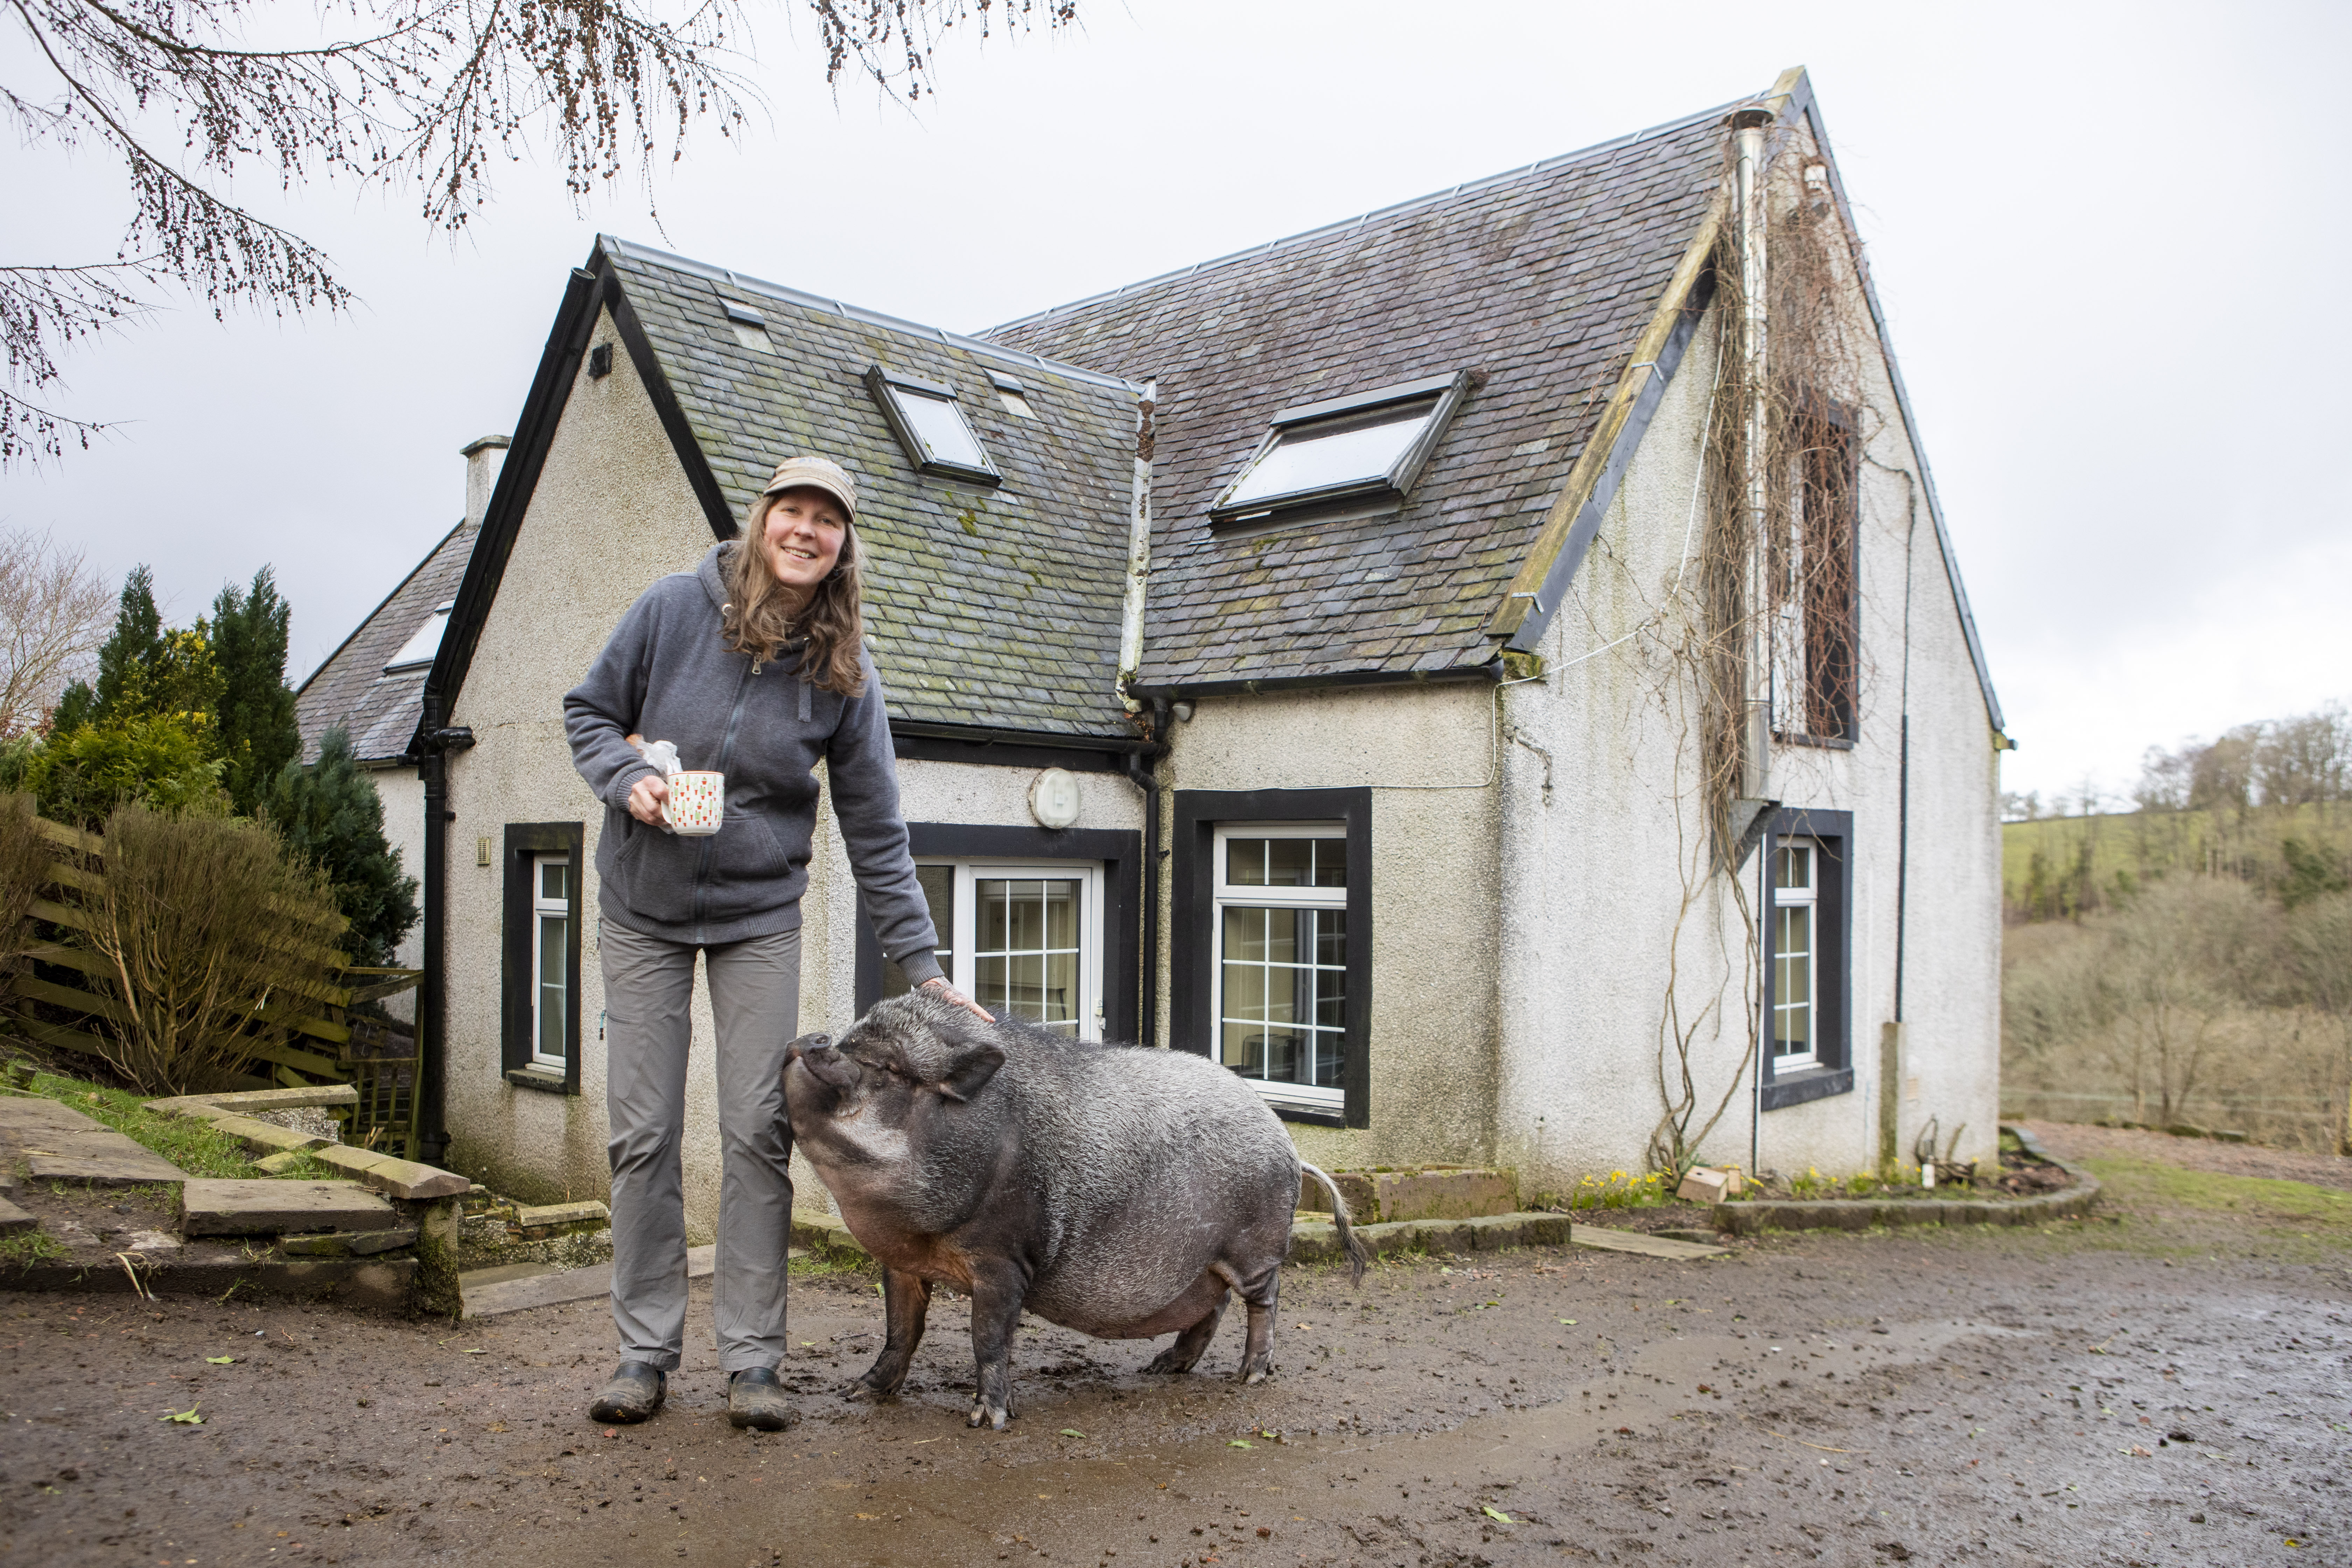 The giant hog is living in a three-bedroom house.